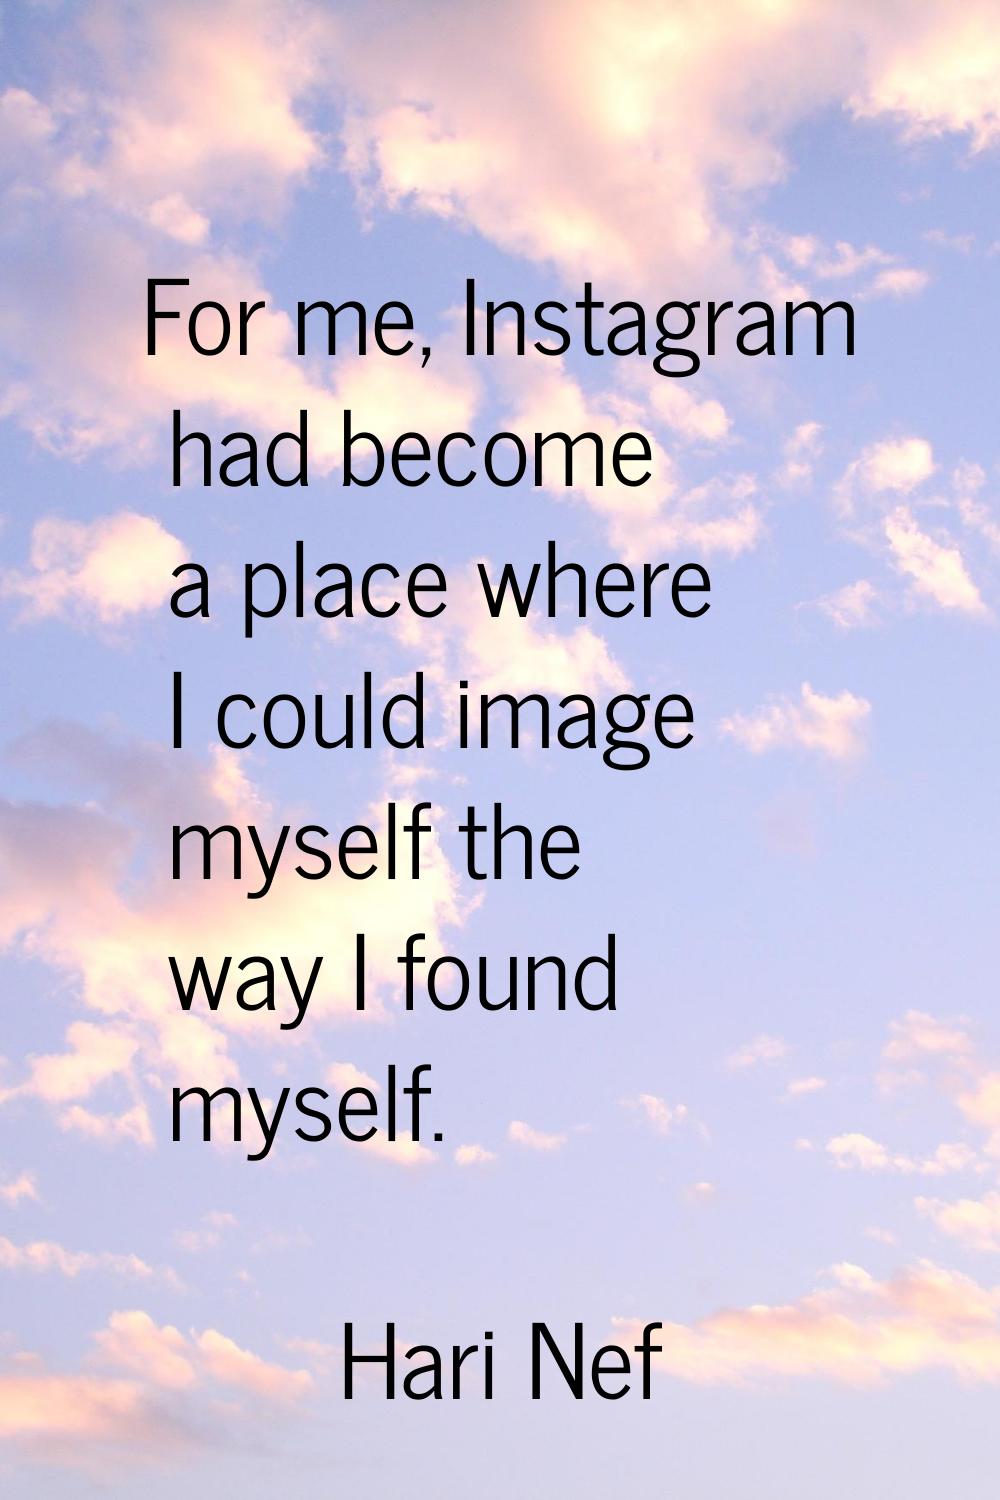 For me, Instagram had become a place where I could image myself the way I found myself.